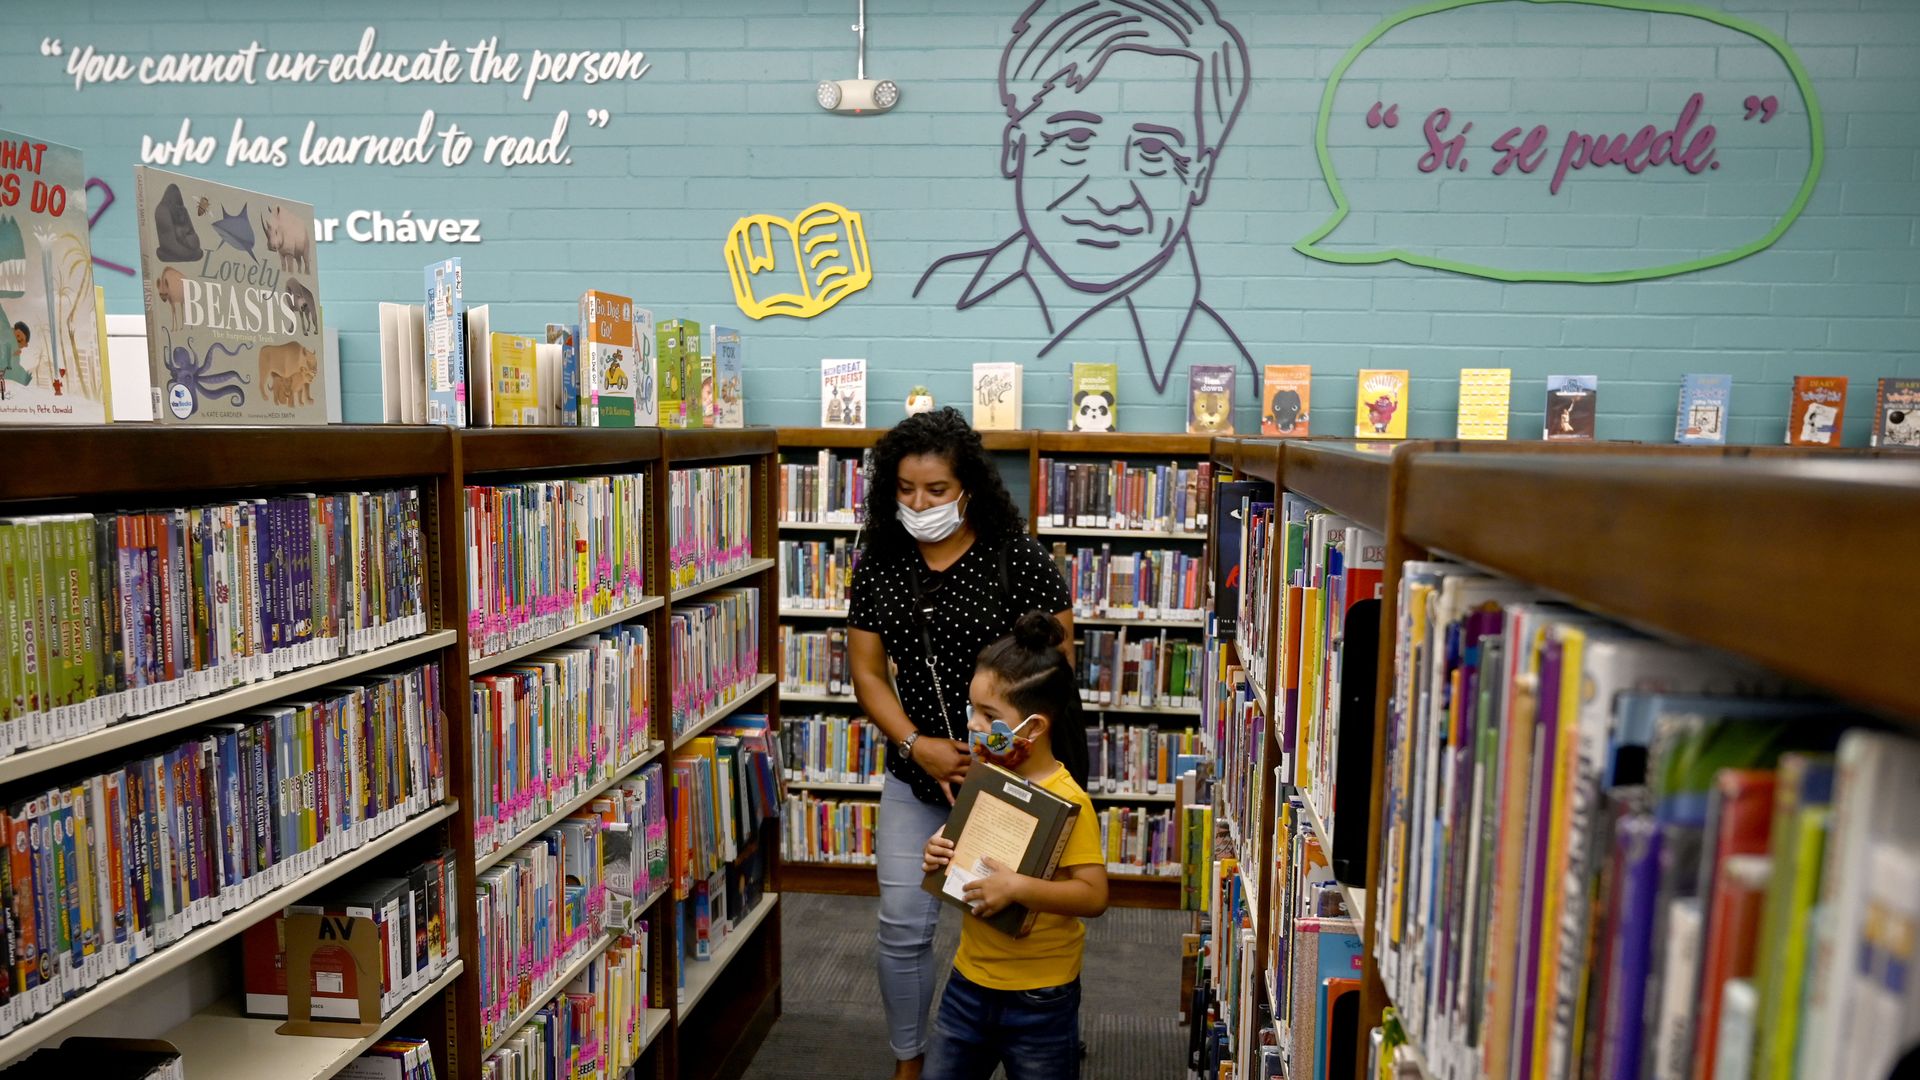 A young boy browses library book shelves